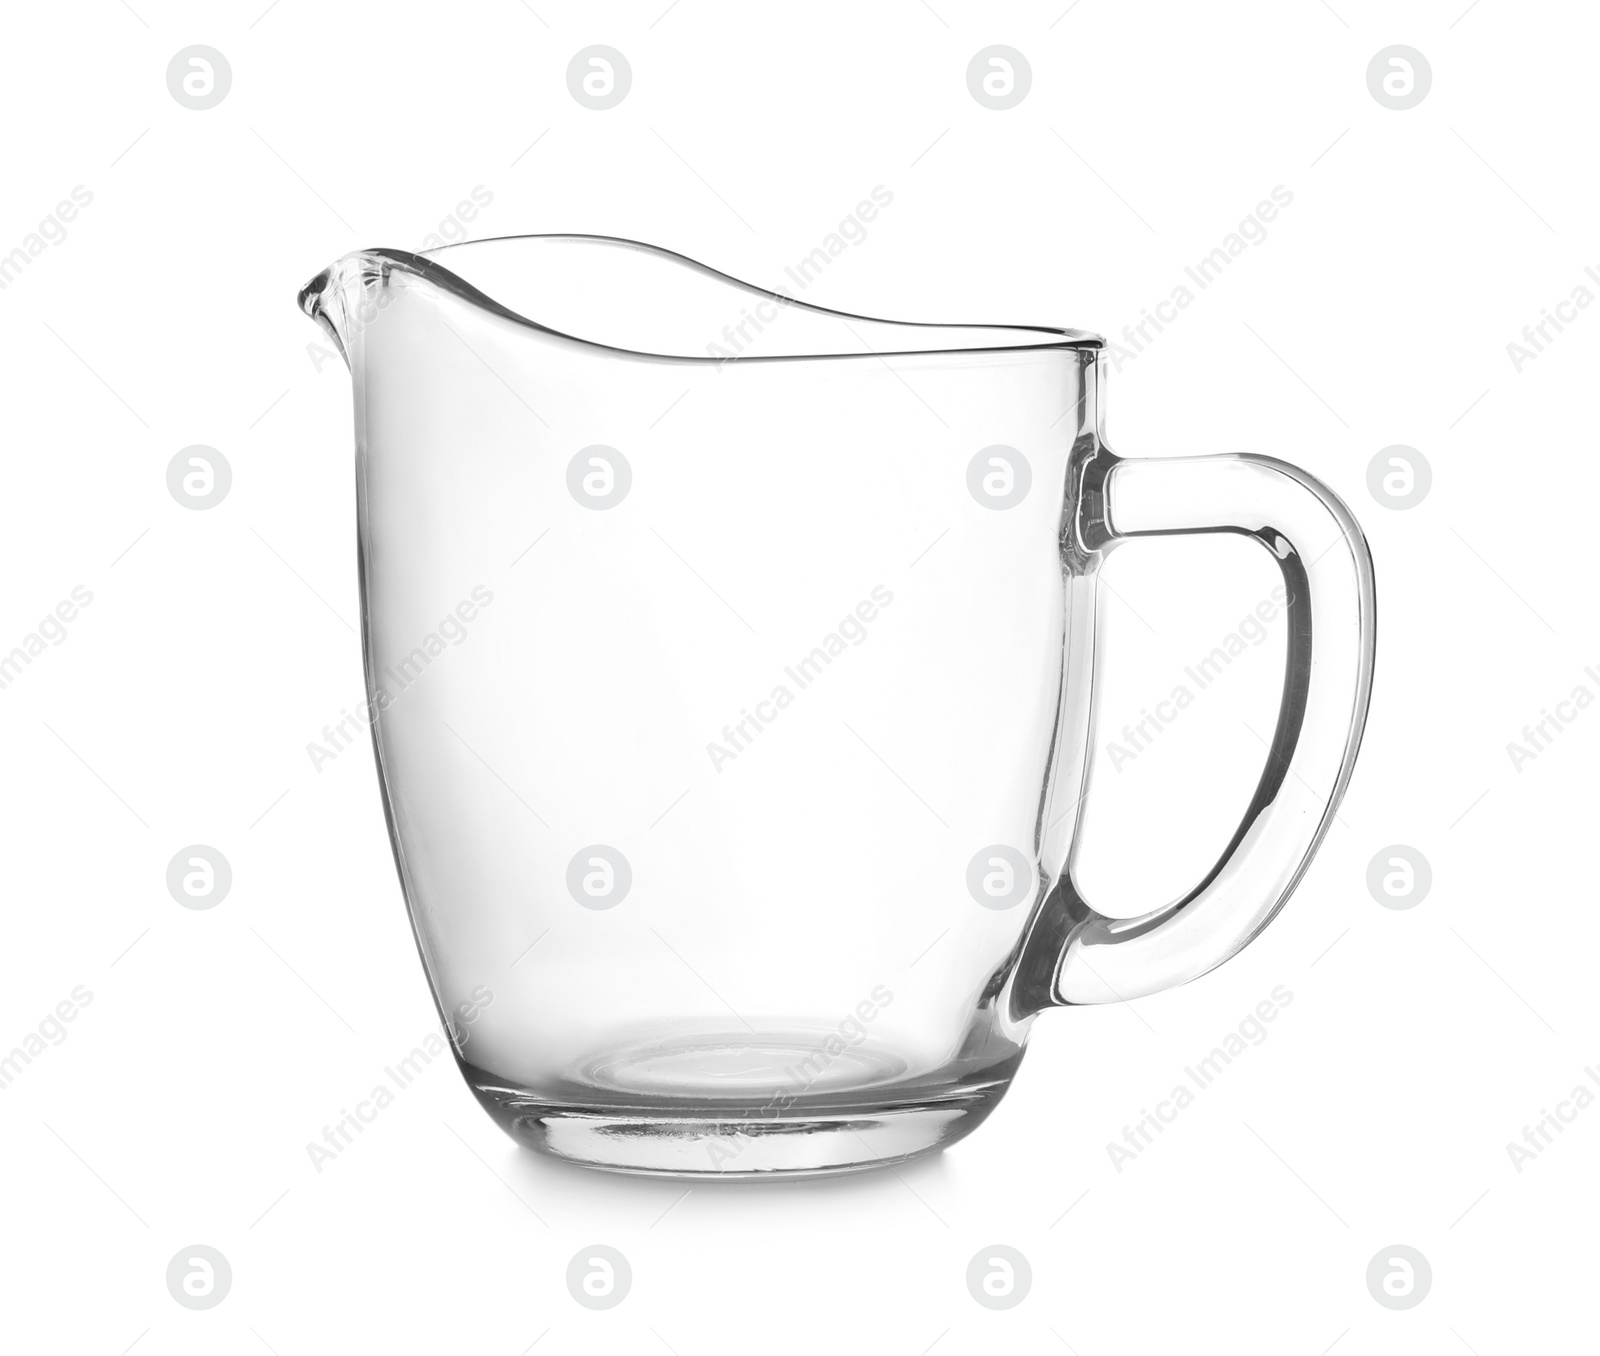 Photo of Clean empty glass jug isolated on white